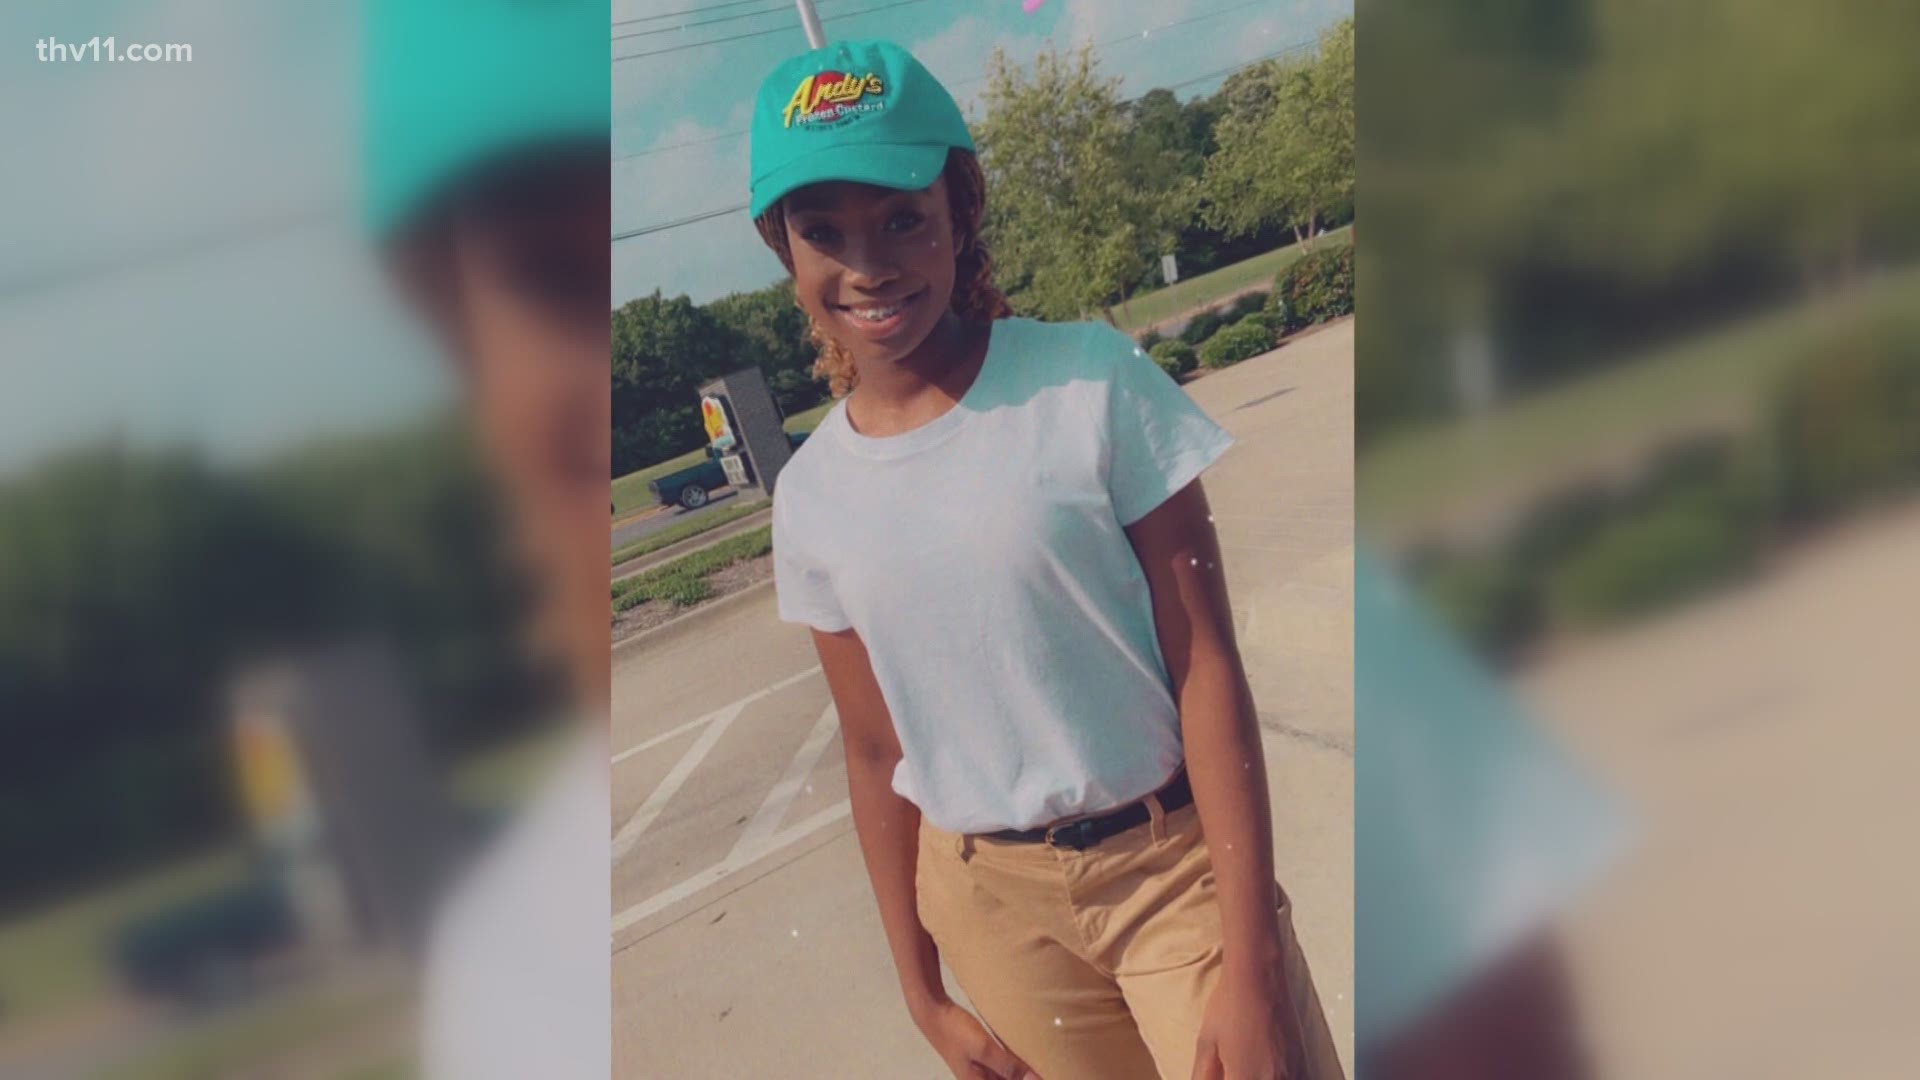 Just one month into her high-school dream job at Andy's Frozen Custard in Conway, a 16-year-old girl has already hung up her apron. Racial comments drove her away.